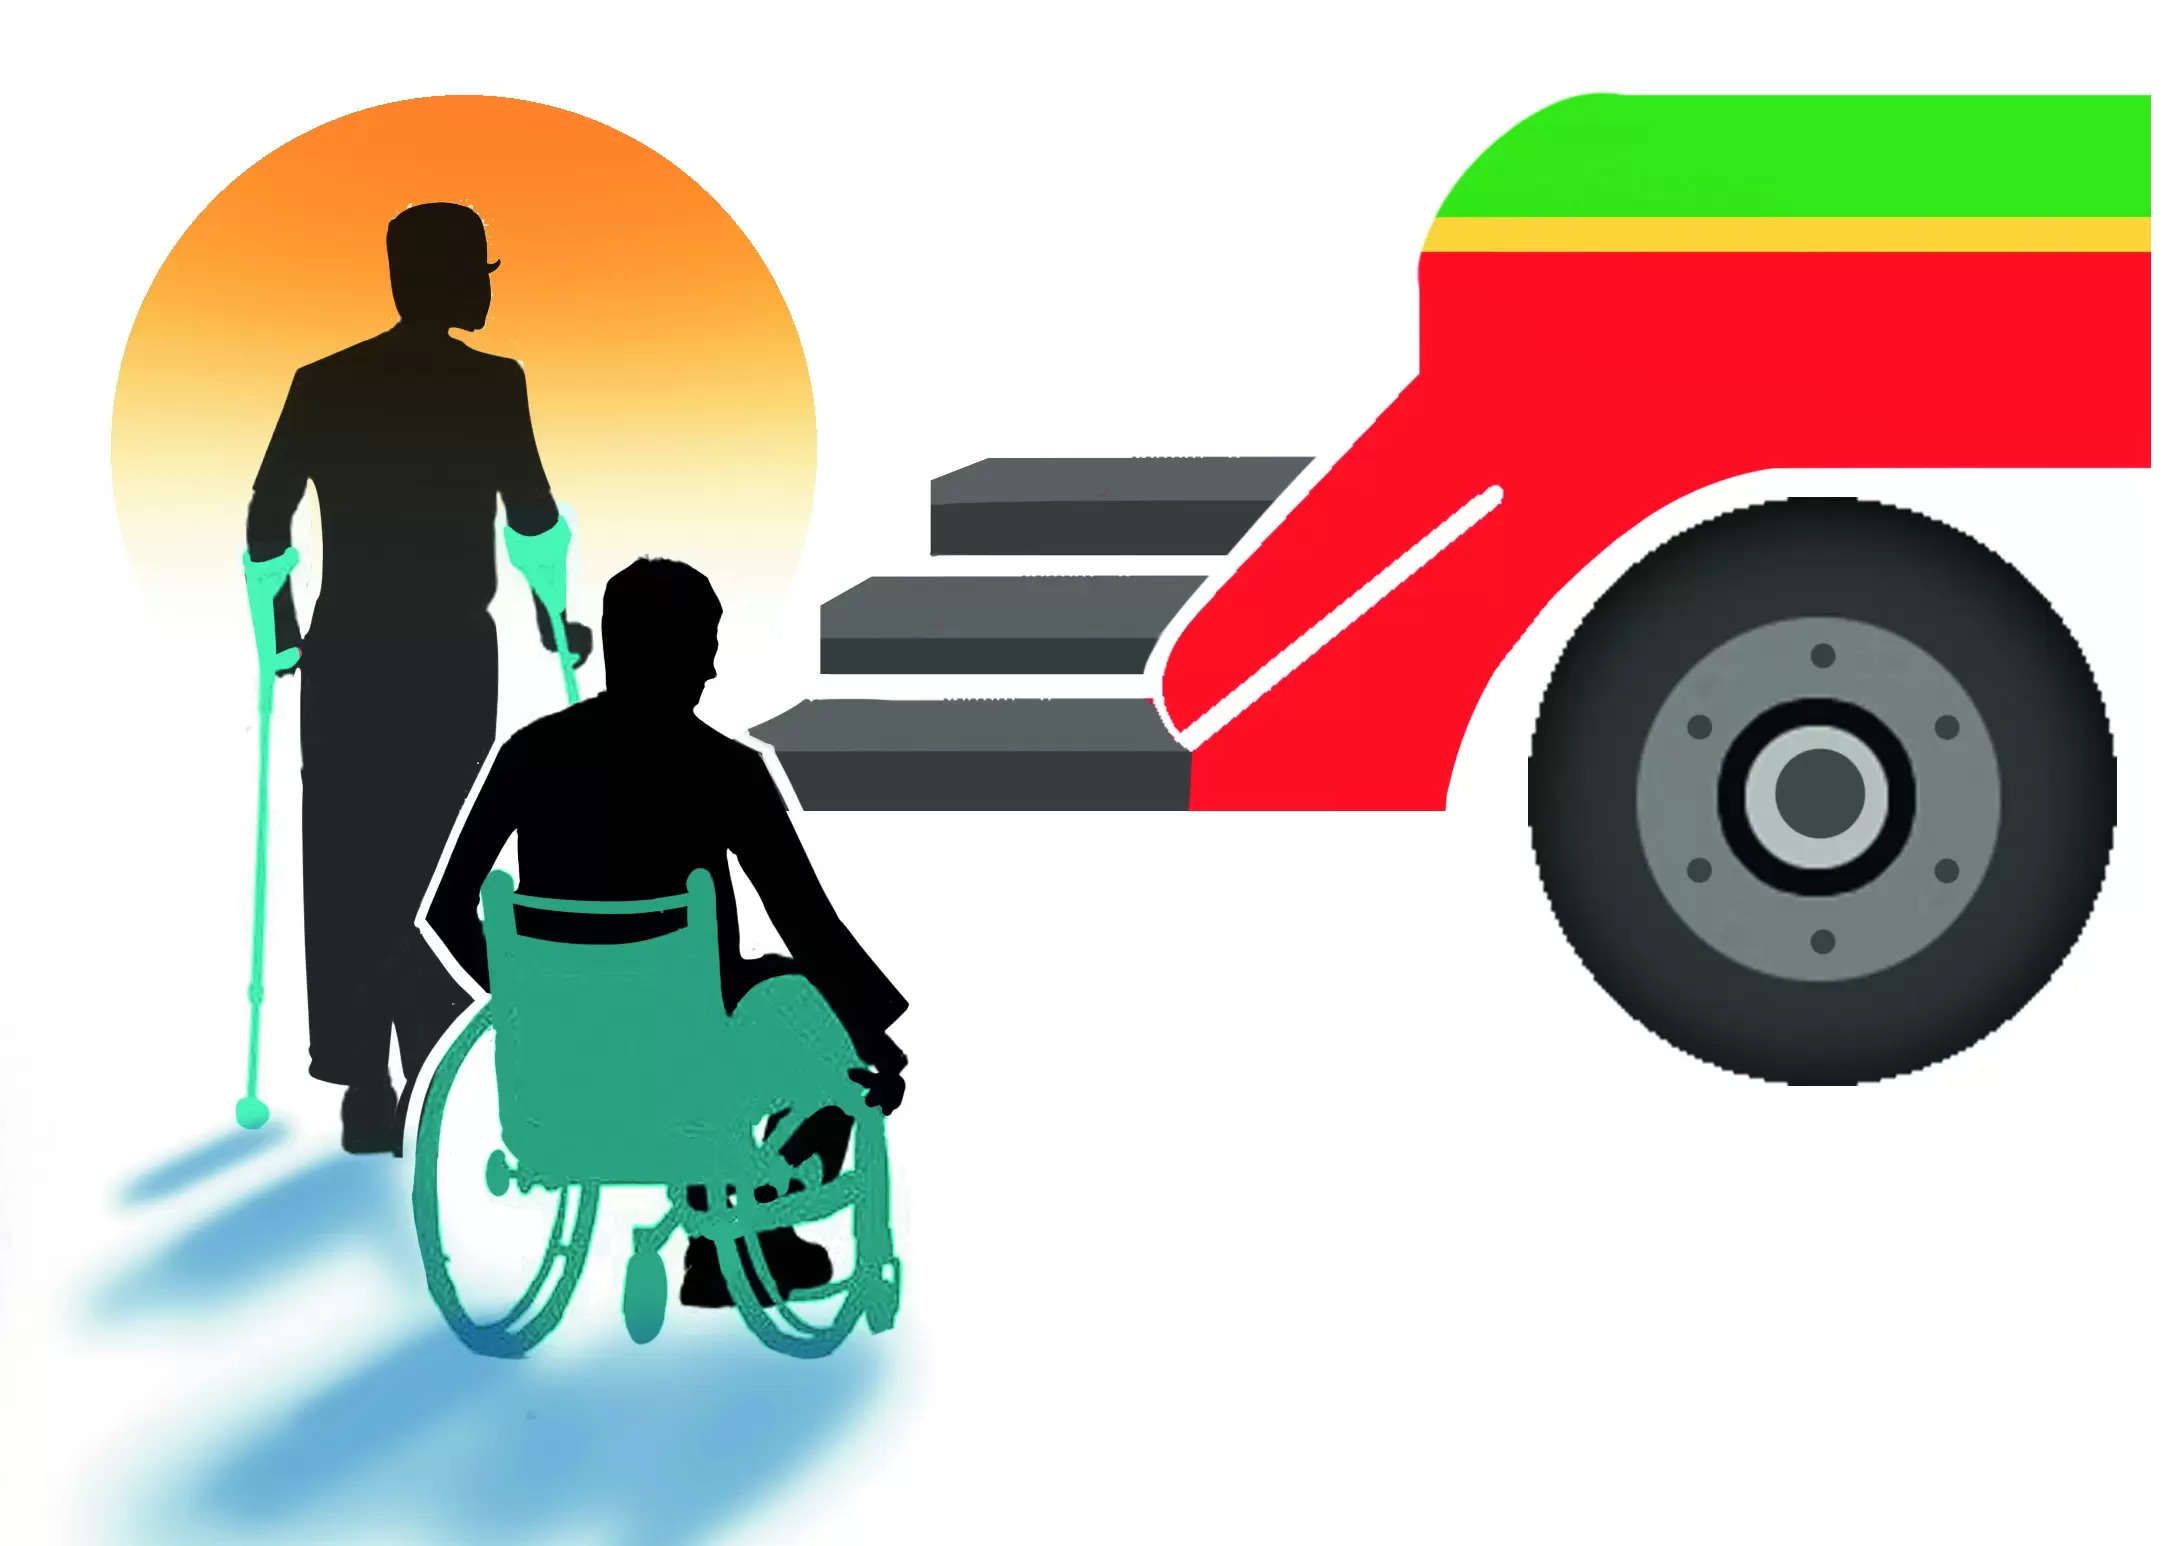 Hc To Govt: Order Private Buses To Provide Facilities For Disabled | Bengaluru News – Times of India